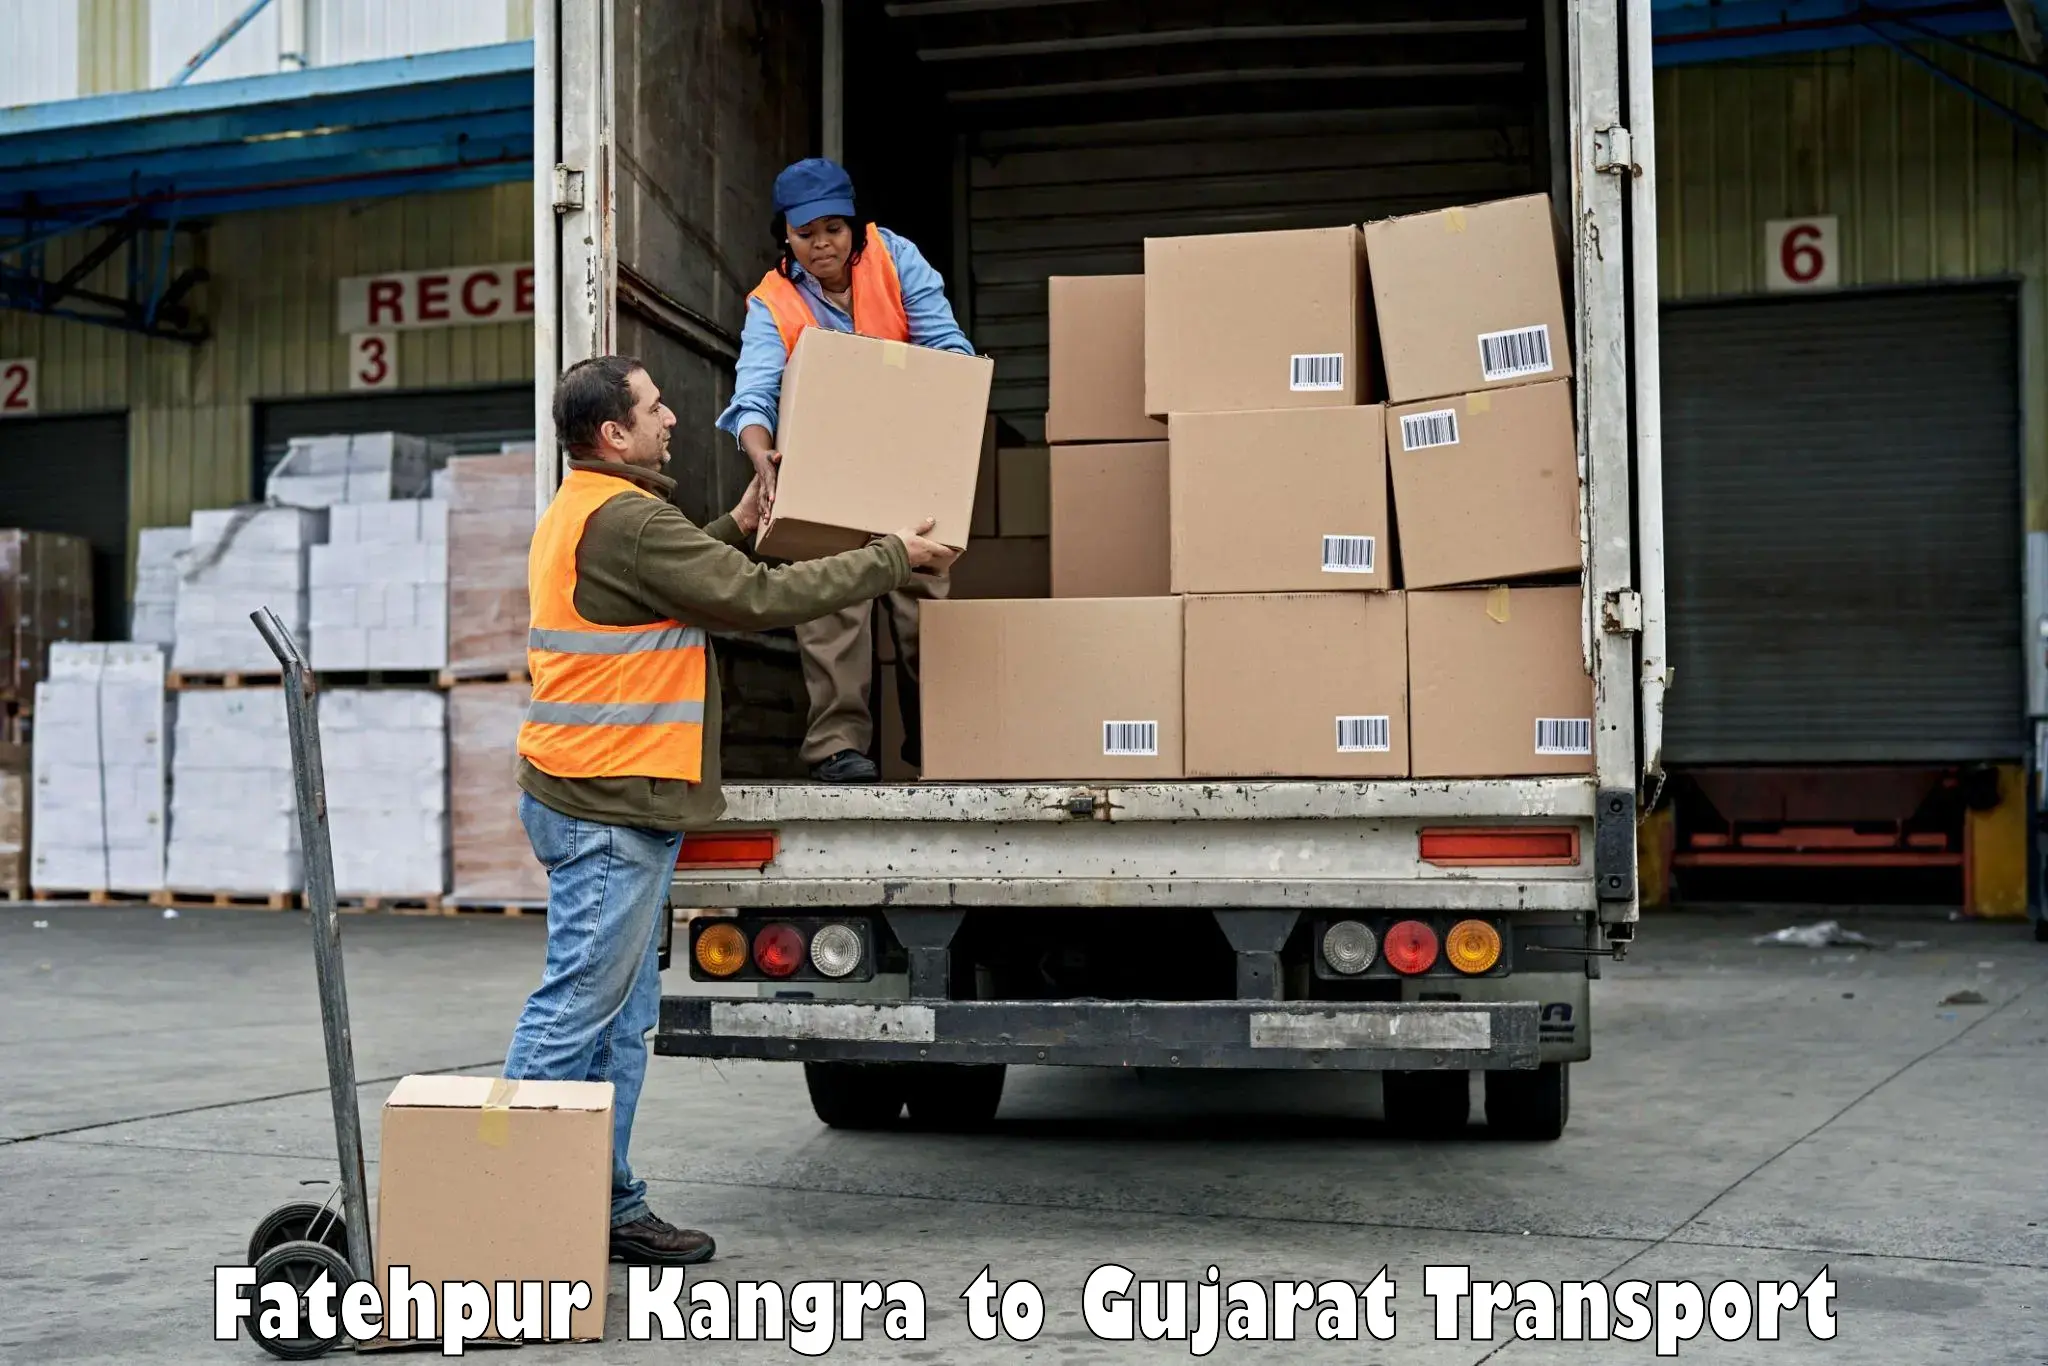 Luggage transport services in Fatehpur Kangra to Rajkot